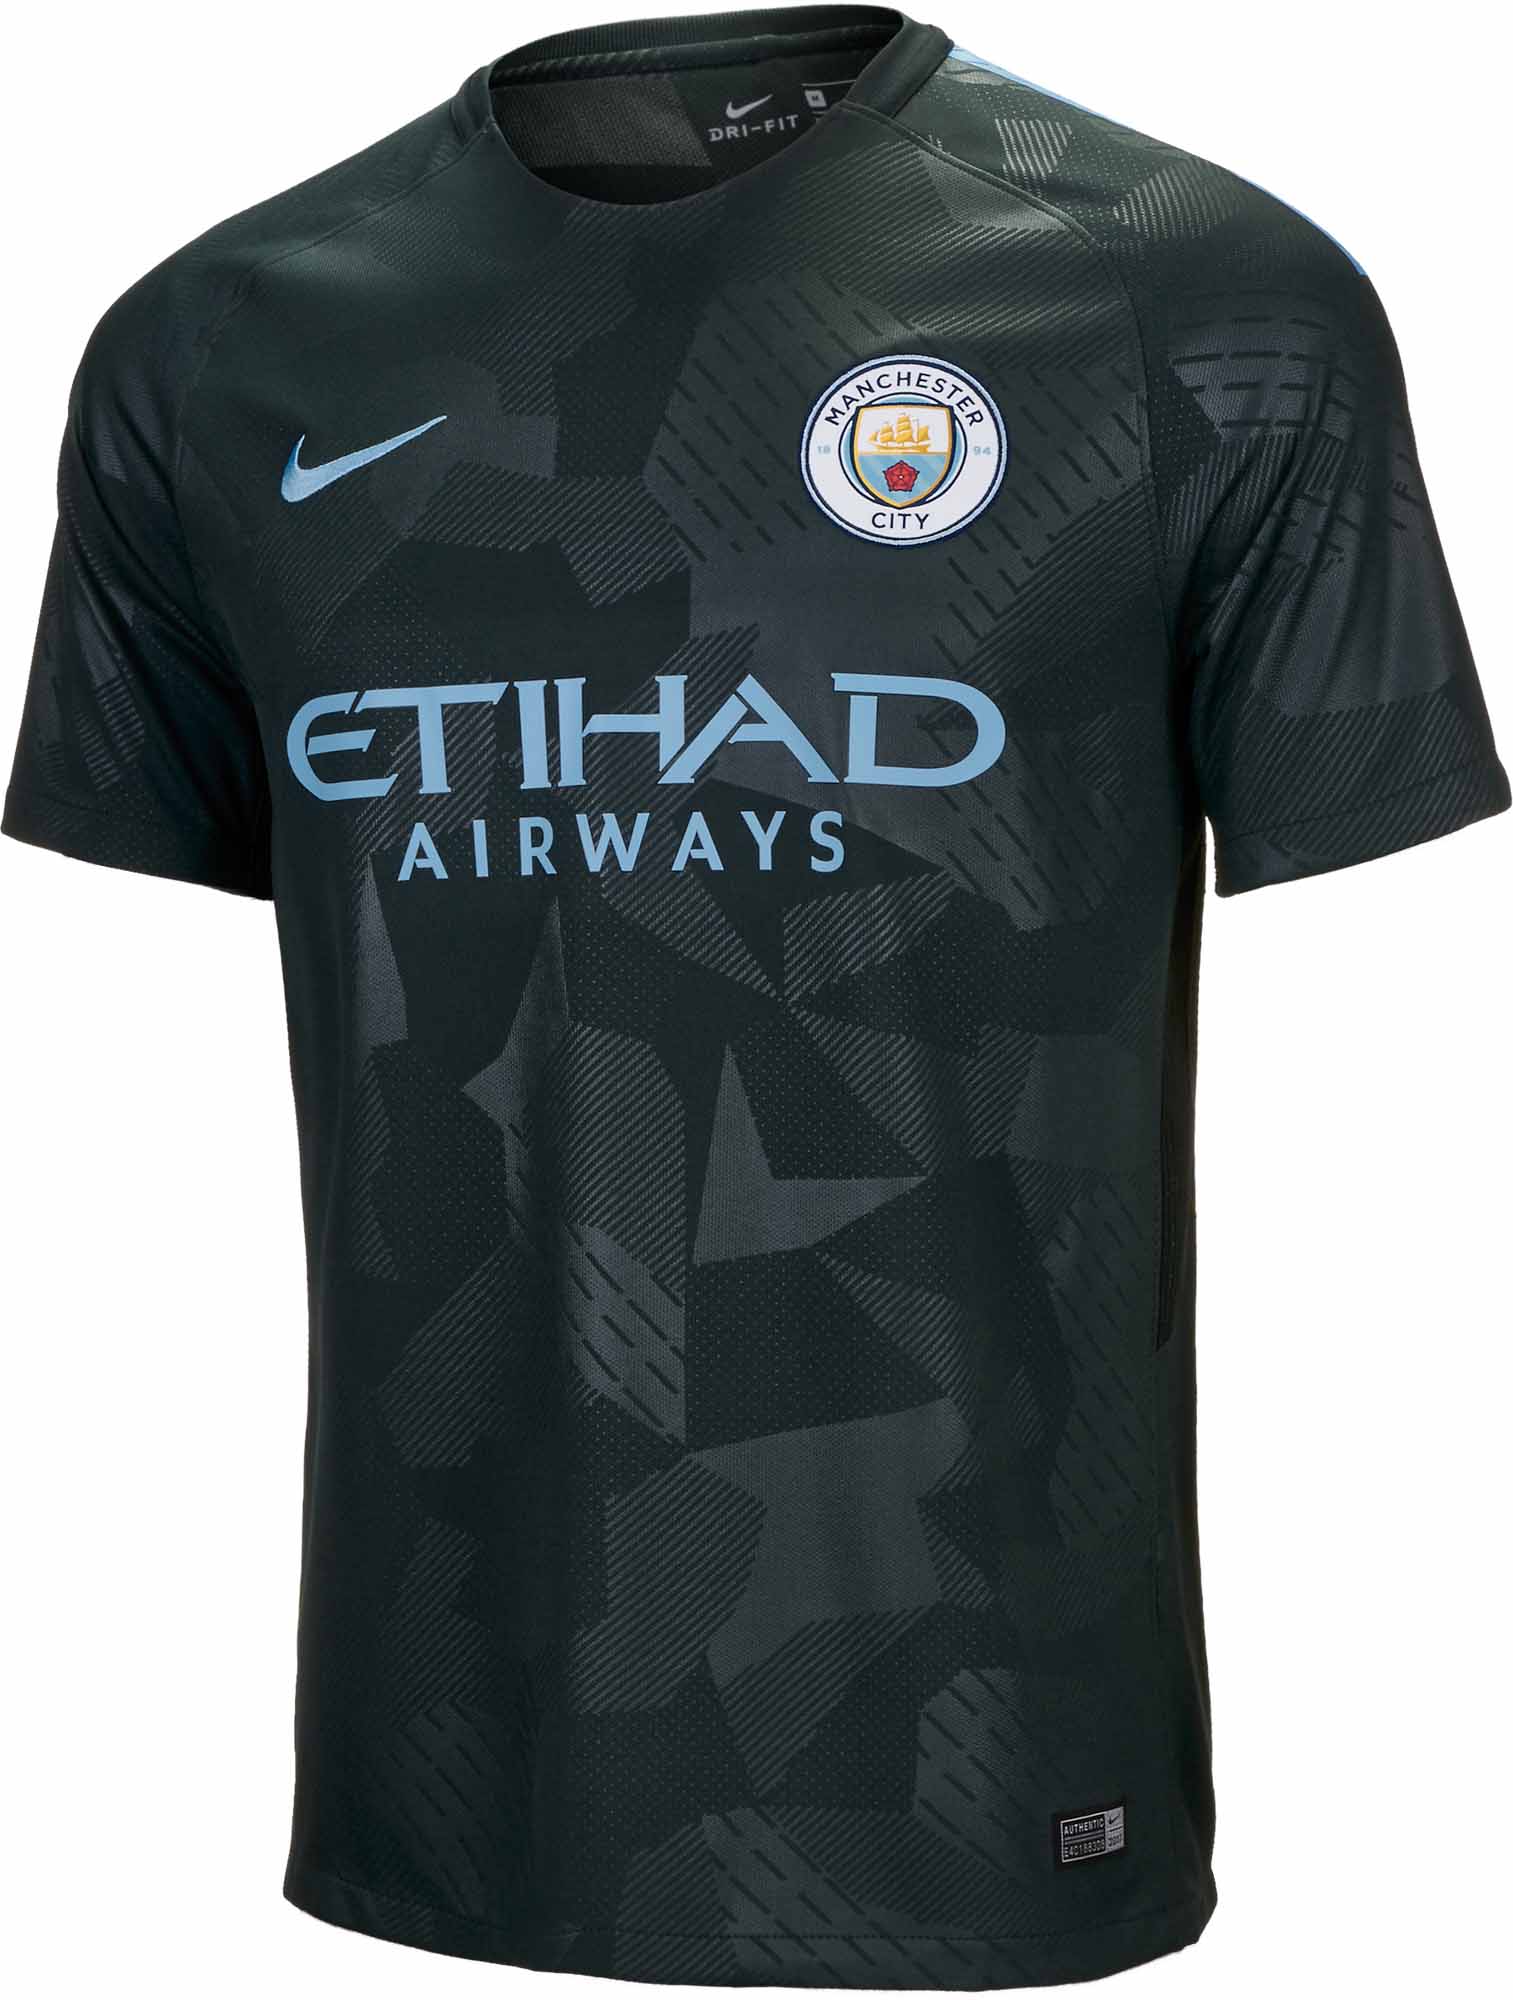 New 2017-18 Nike kits are here! 